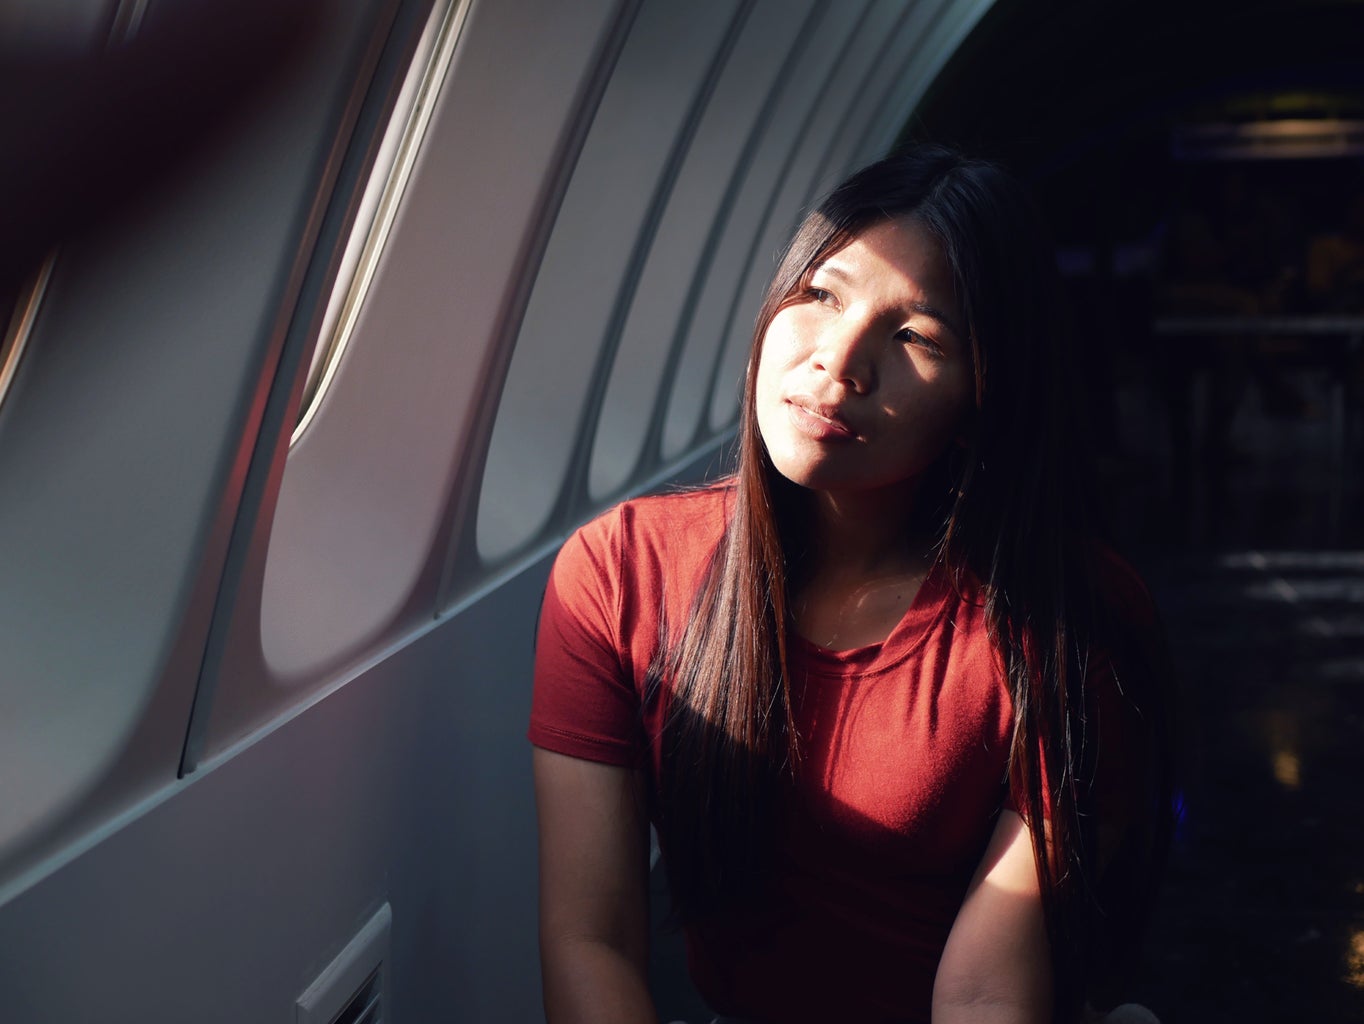 Woman on a plane looking out the window.